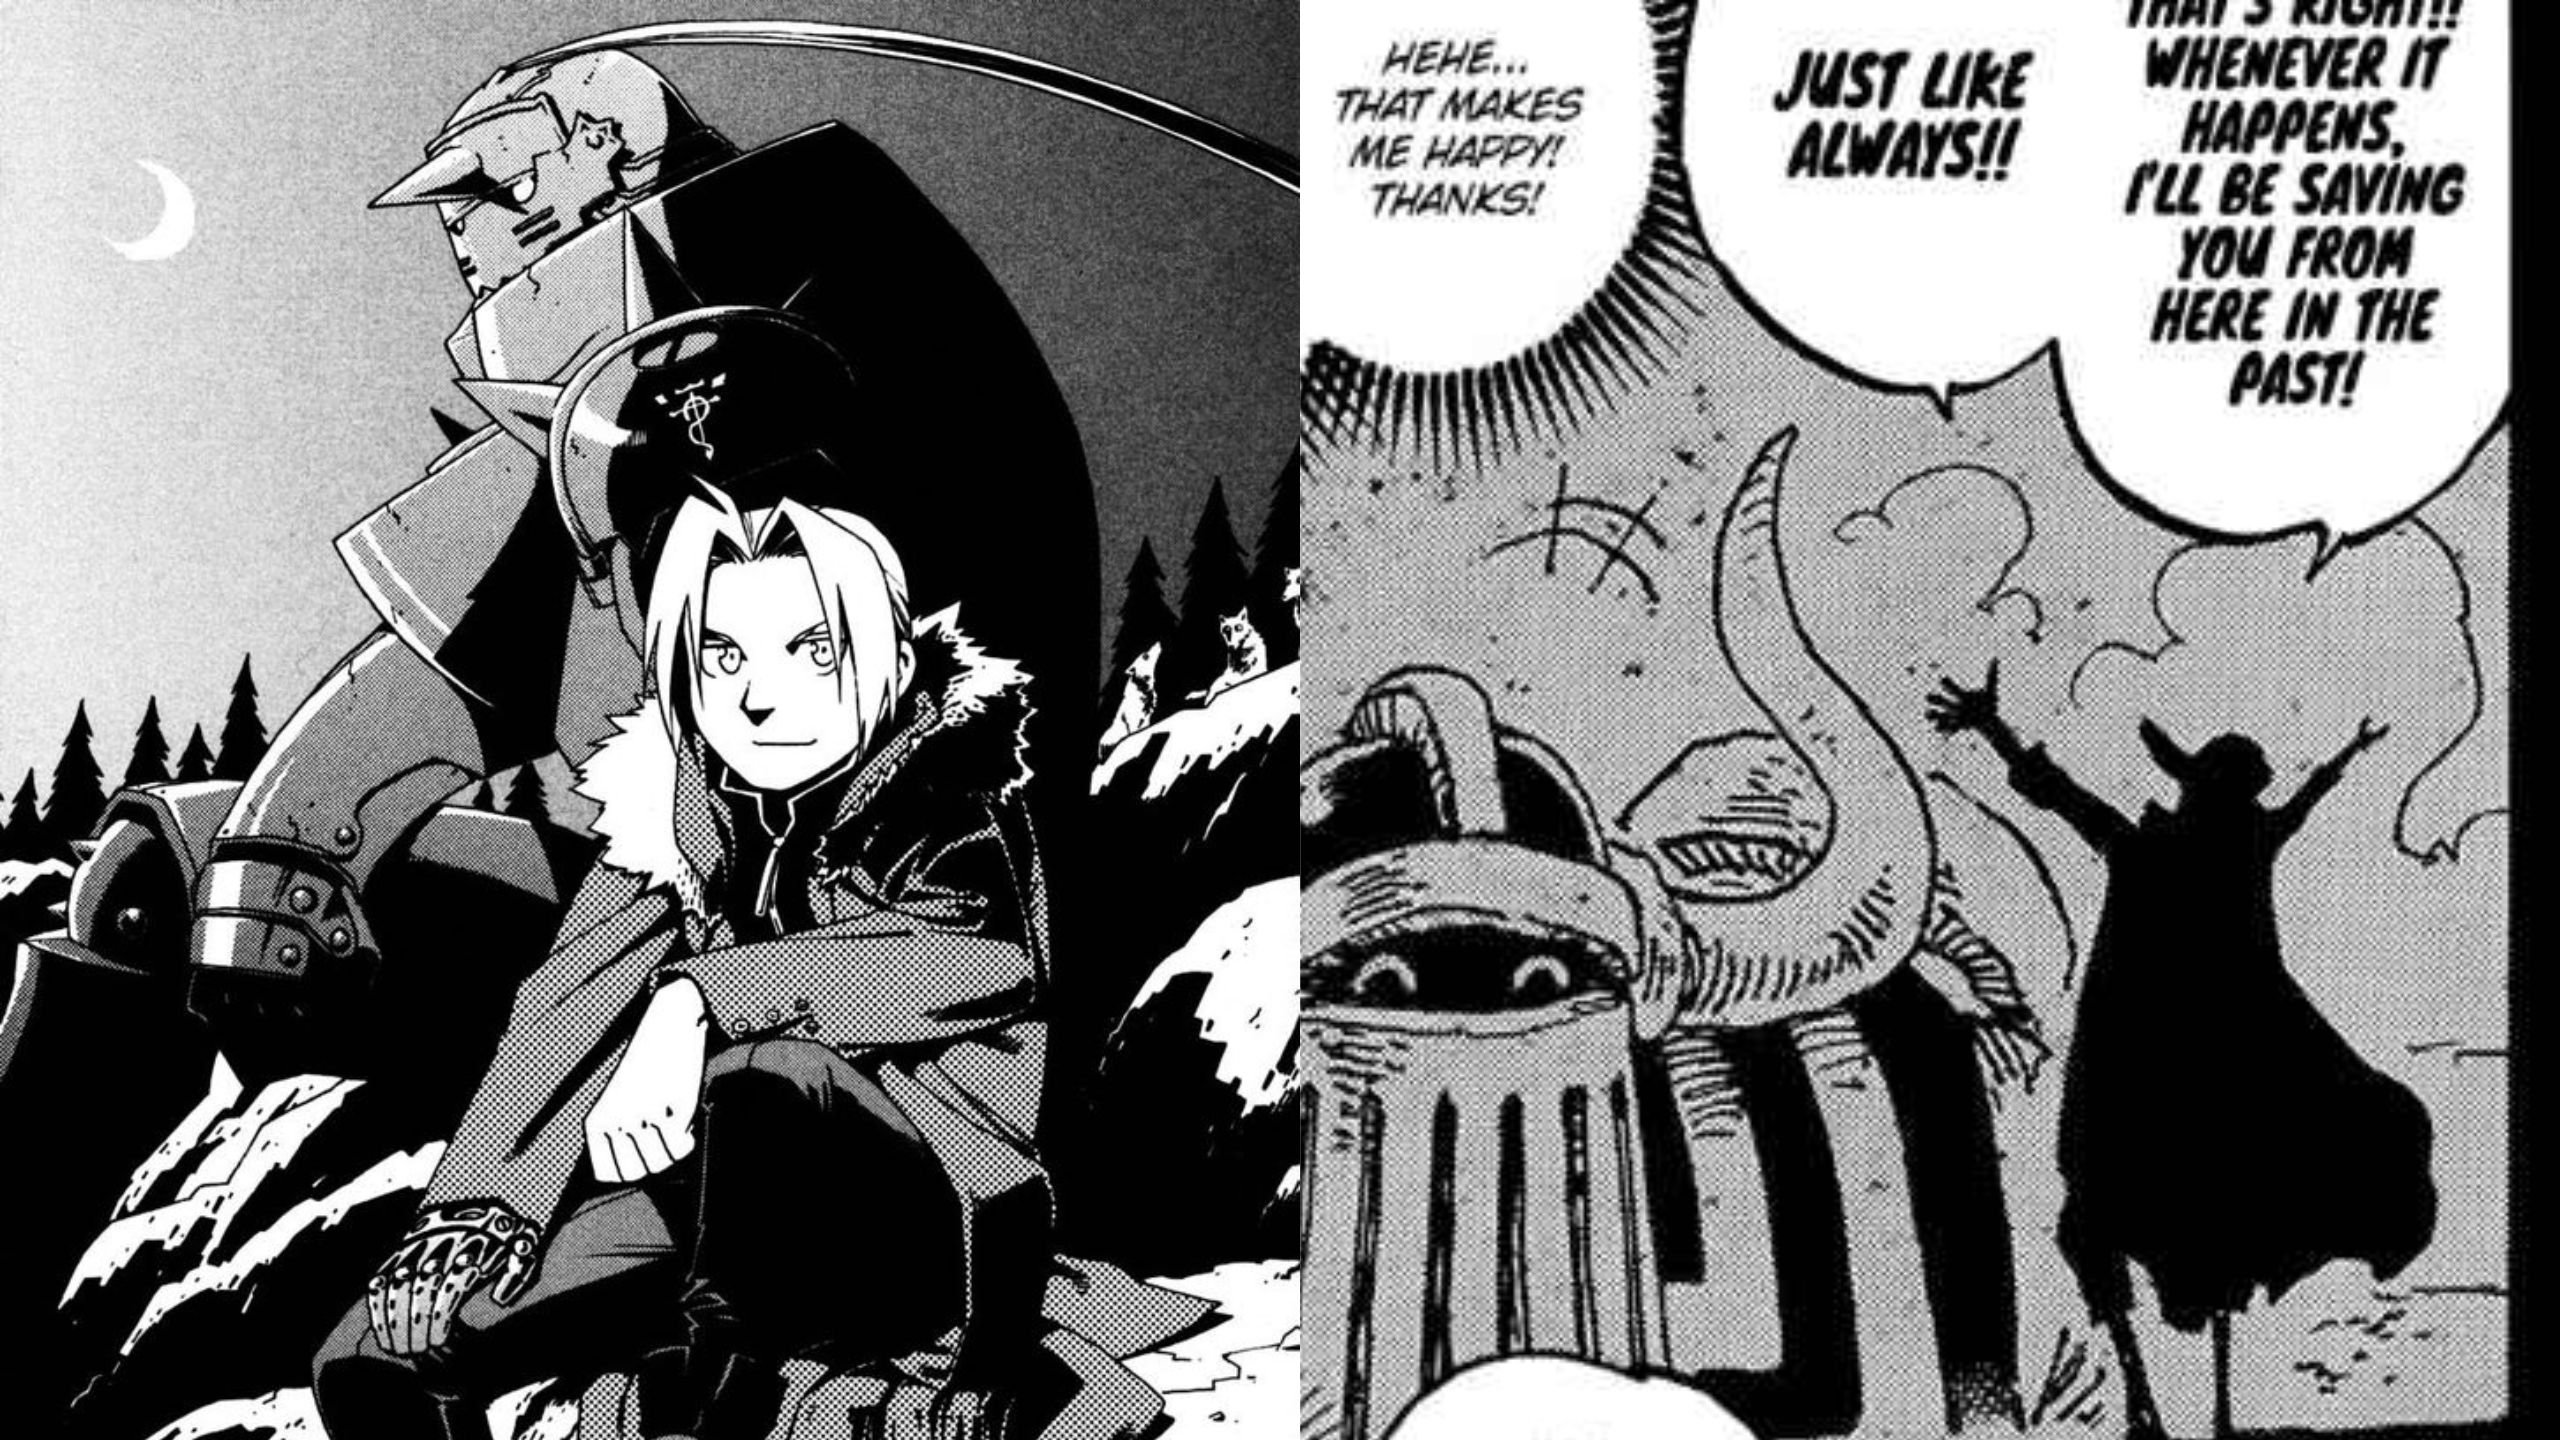 Joy Boy From One Piece Reveal Suggests Oda Drew Inspiration from Fullmetal Alchemist, Hinting at a Deep, Alchemical Backstory